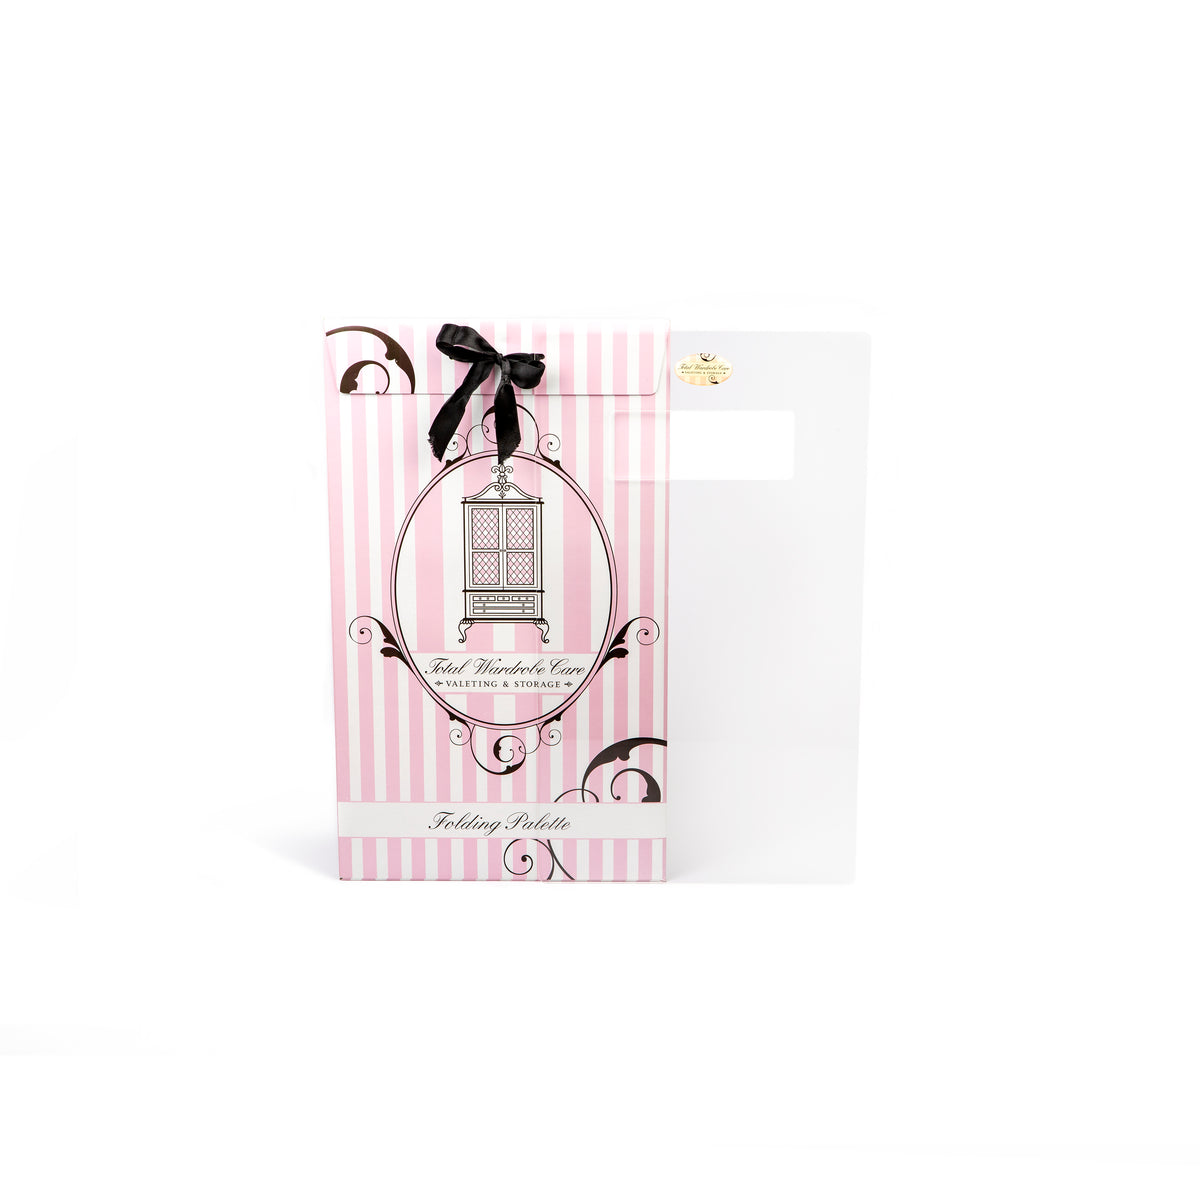 Folding Palette in pink and white striped bag with black ribbon on white background